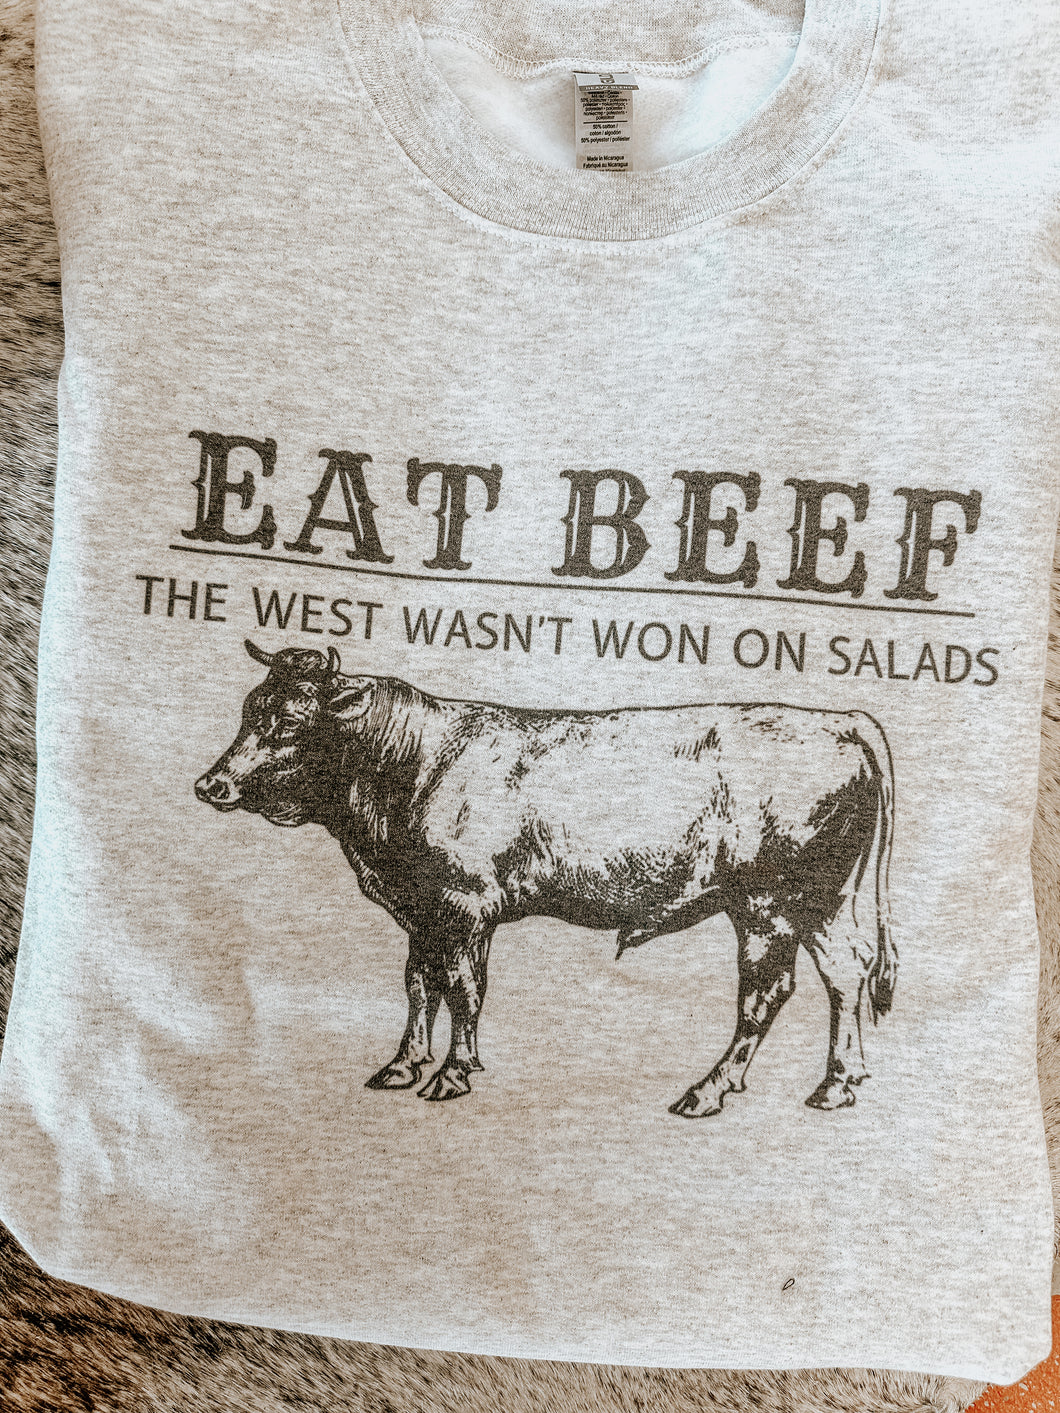 Eat Beef - the west wasn't won on salads